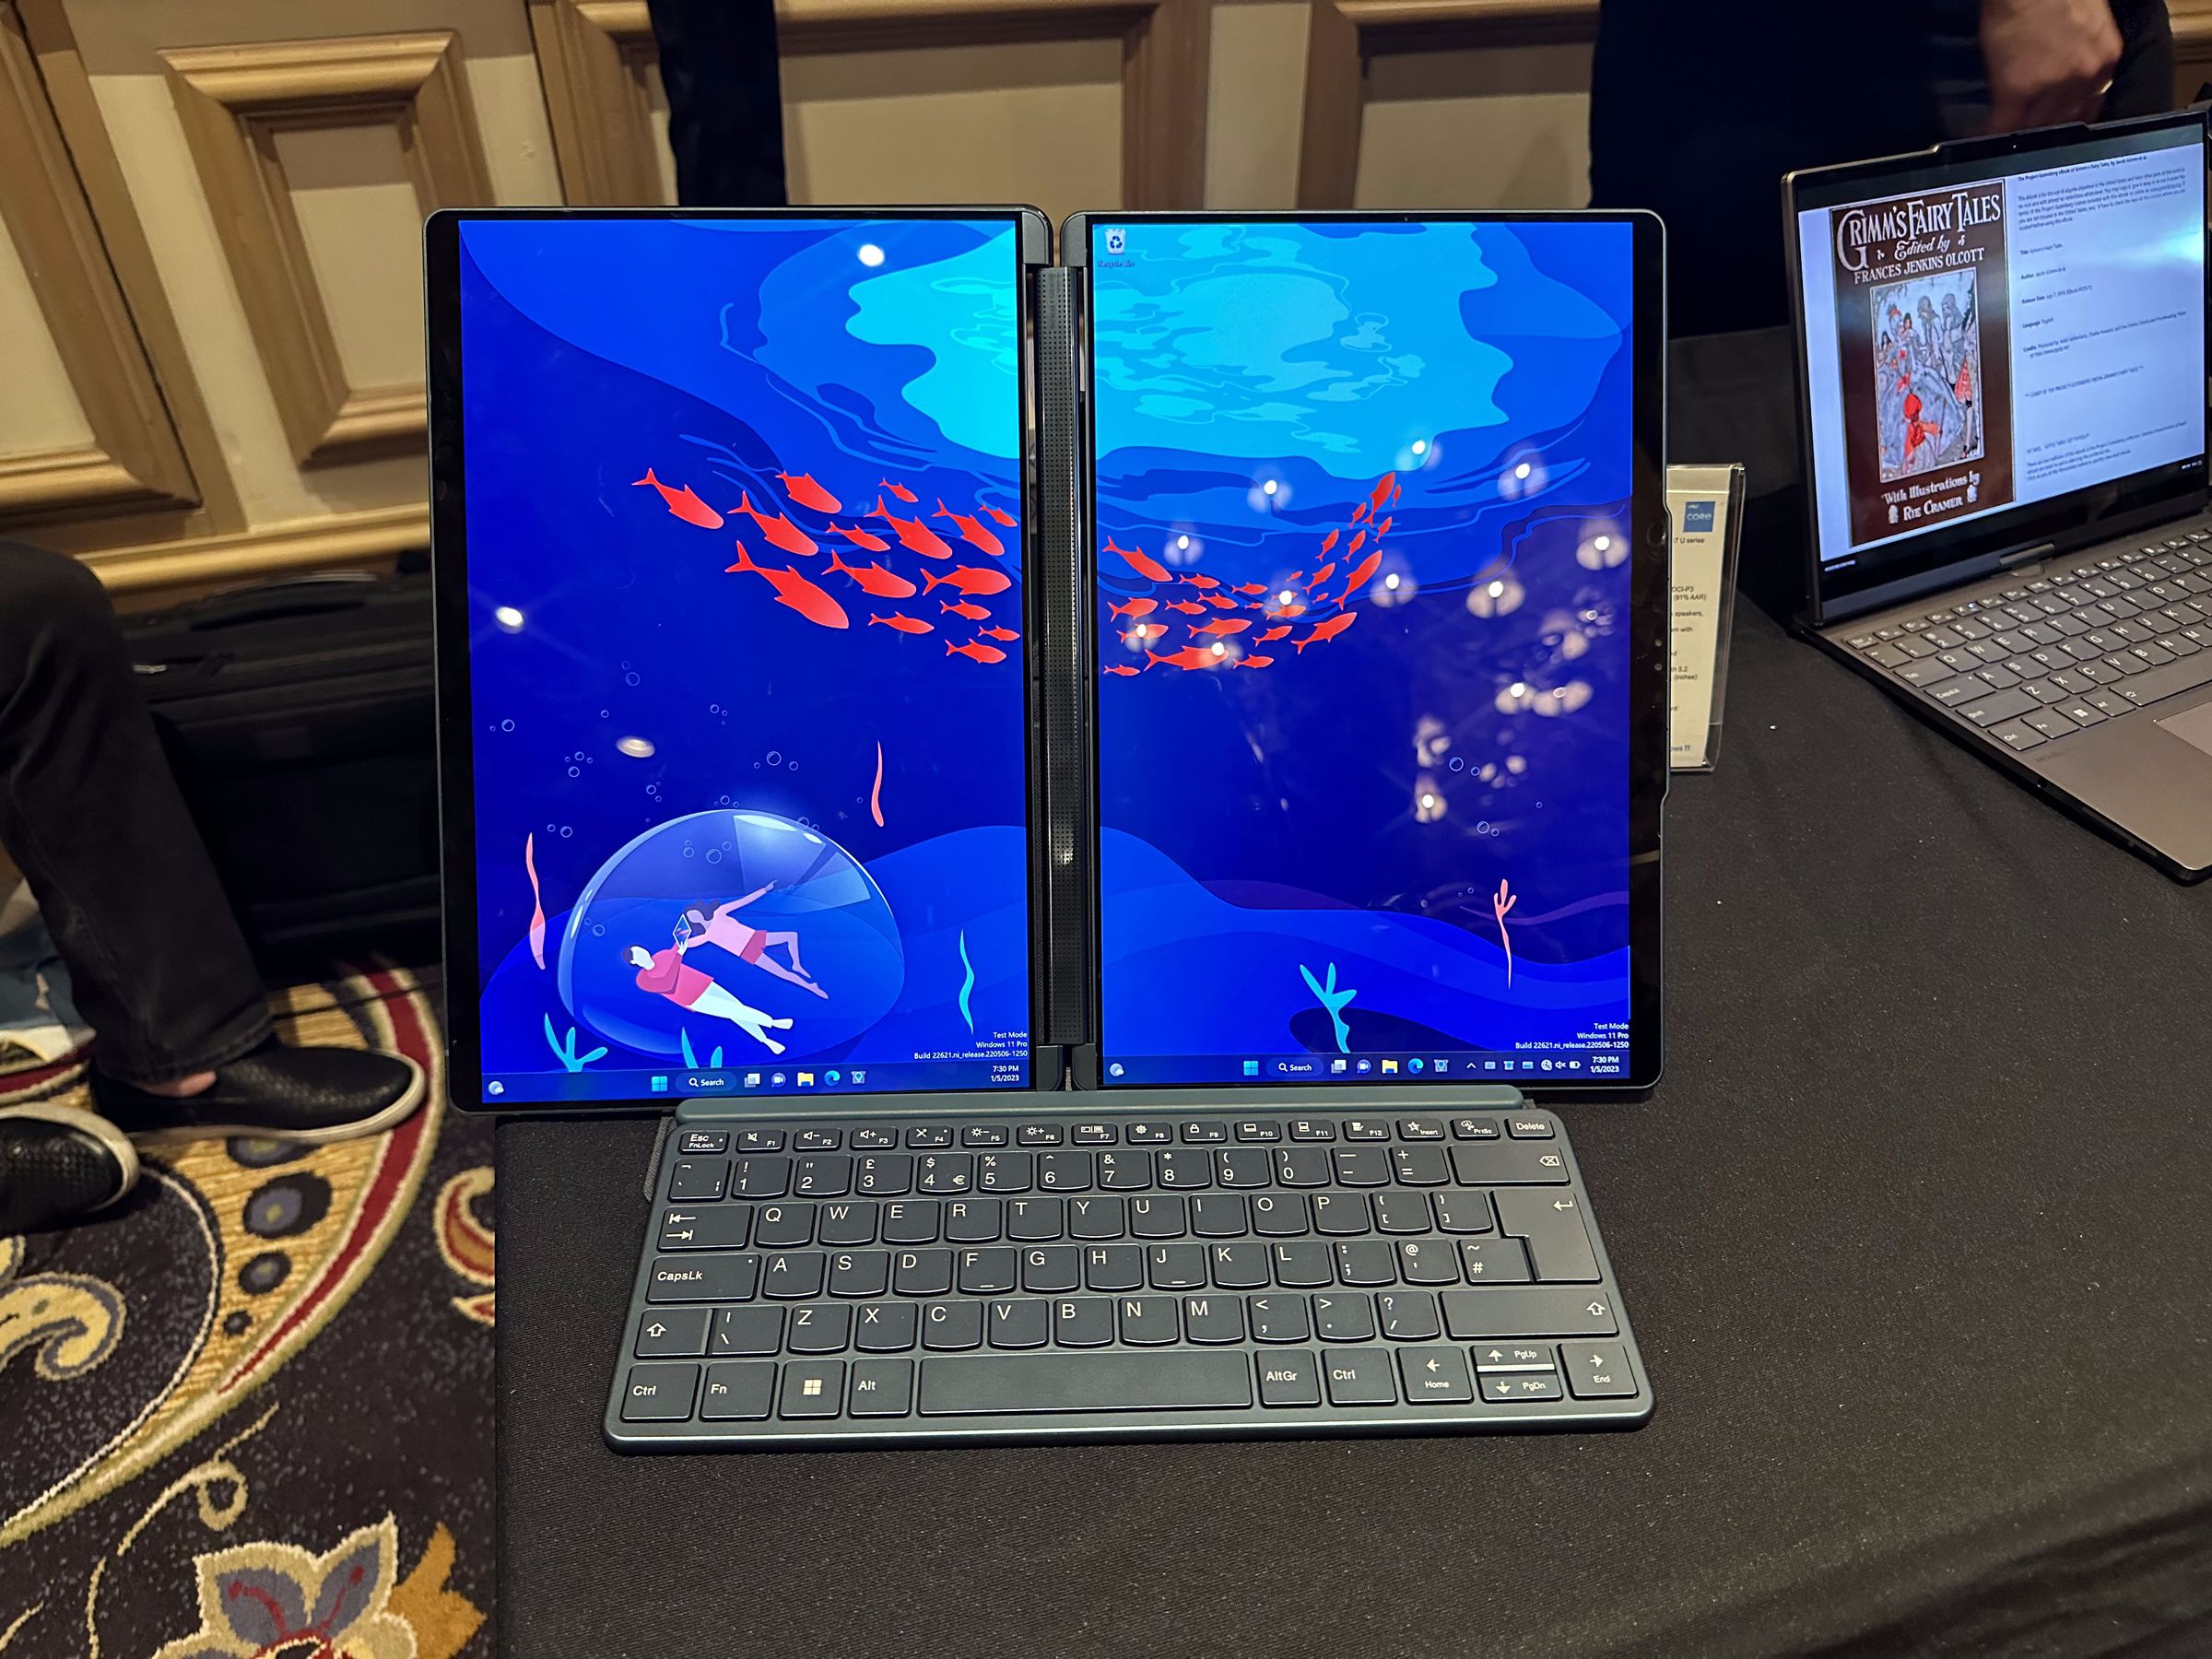 The Lenovo Yoga Book 9i lies in horizontal mode with the keyboard attached.